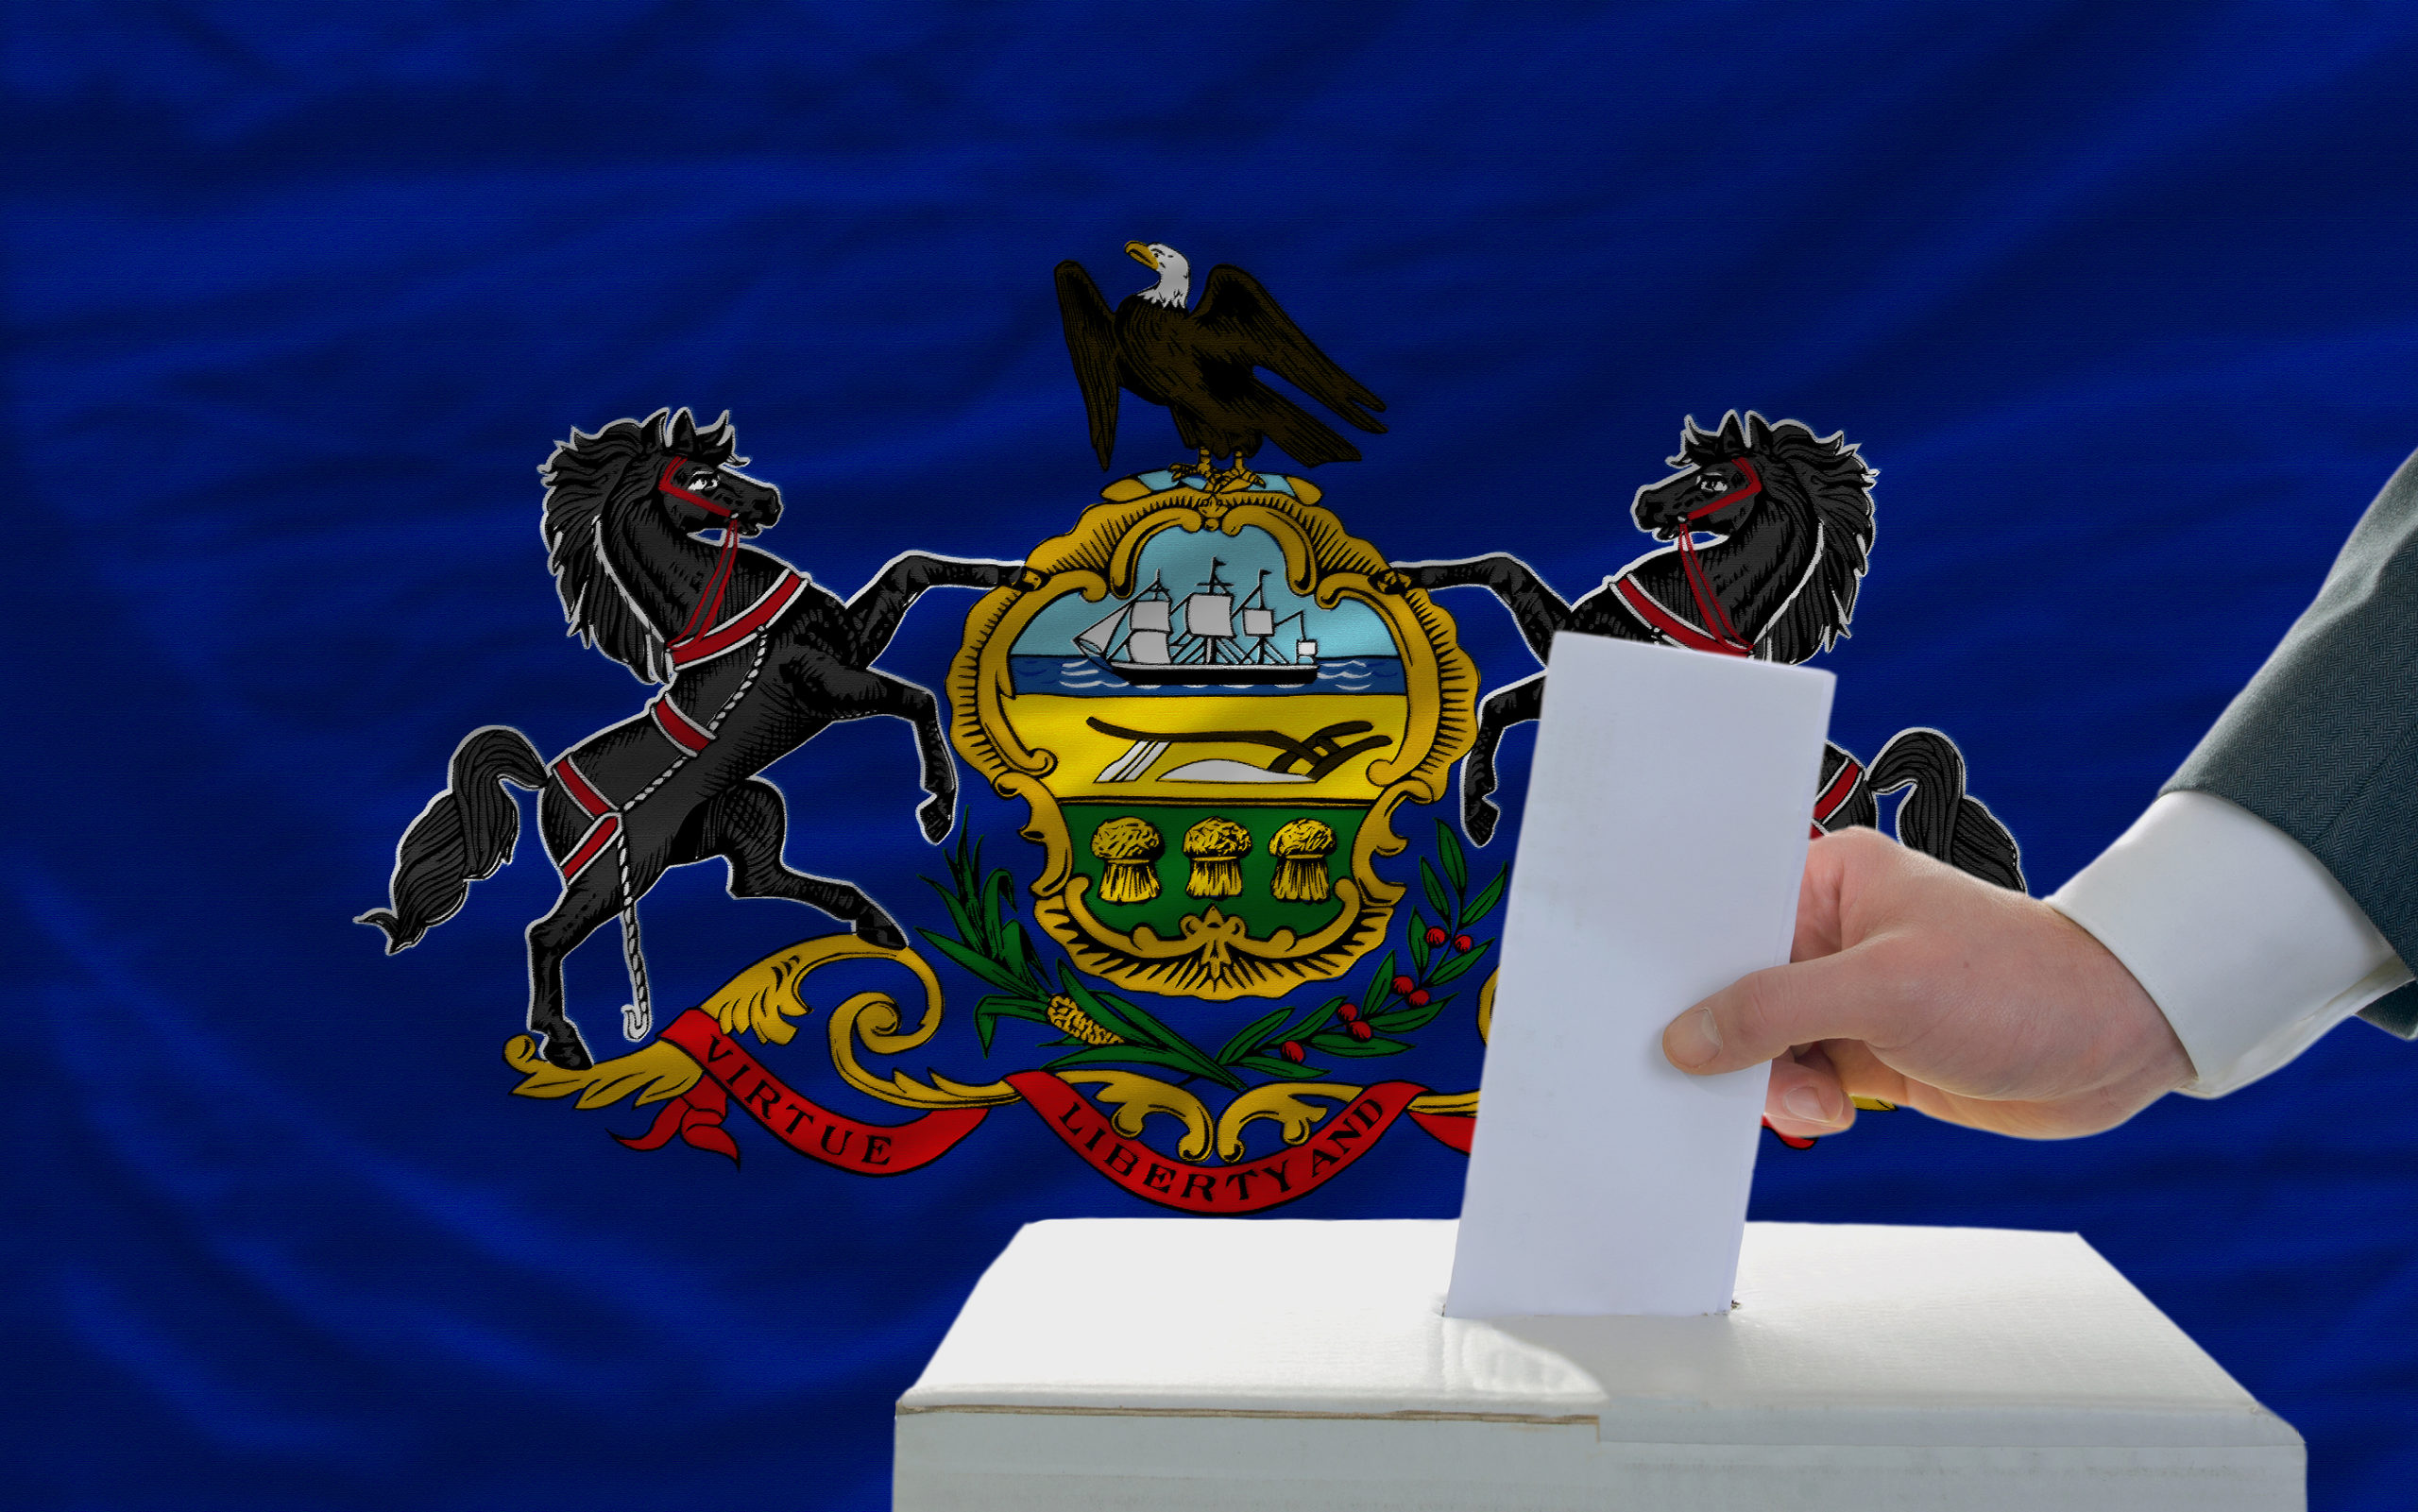 Image for OSP SUPPORTS PENNSYLVANIA’S EFFORTS TO SECURE ITS ELECTIONS